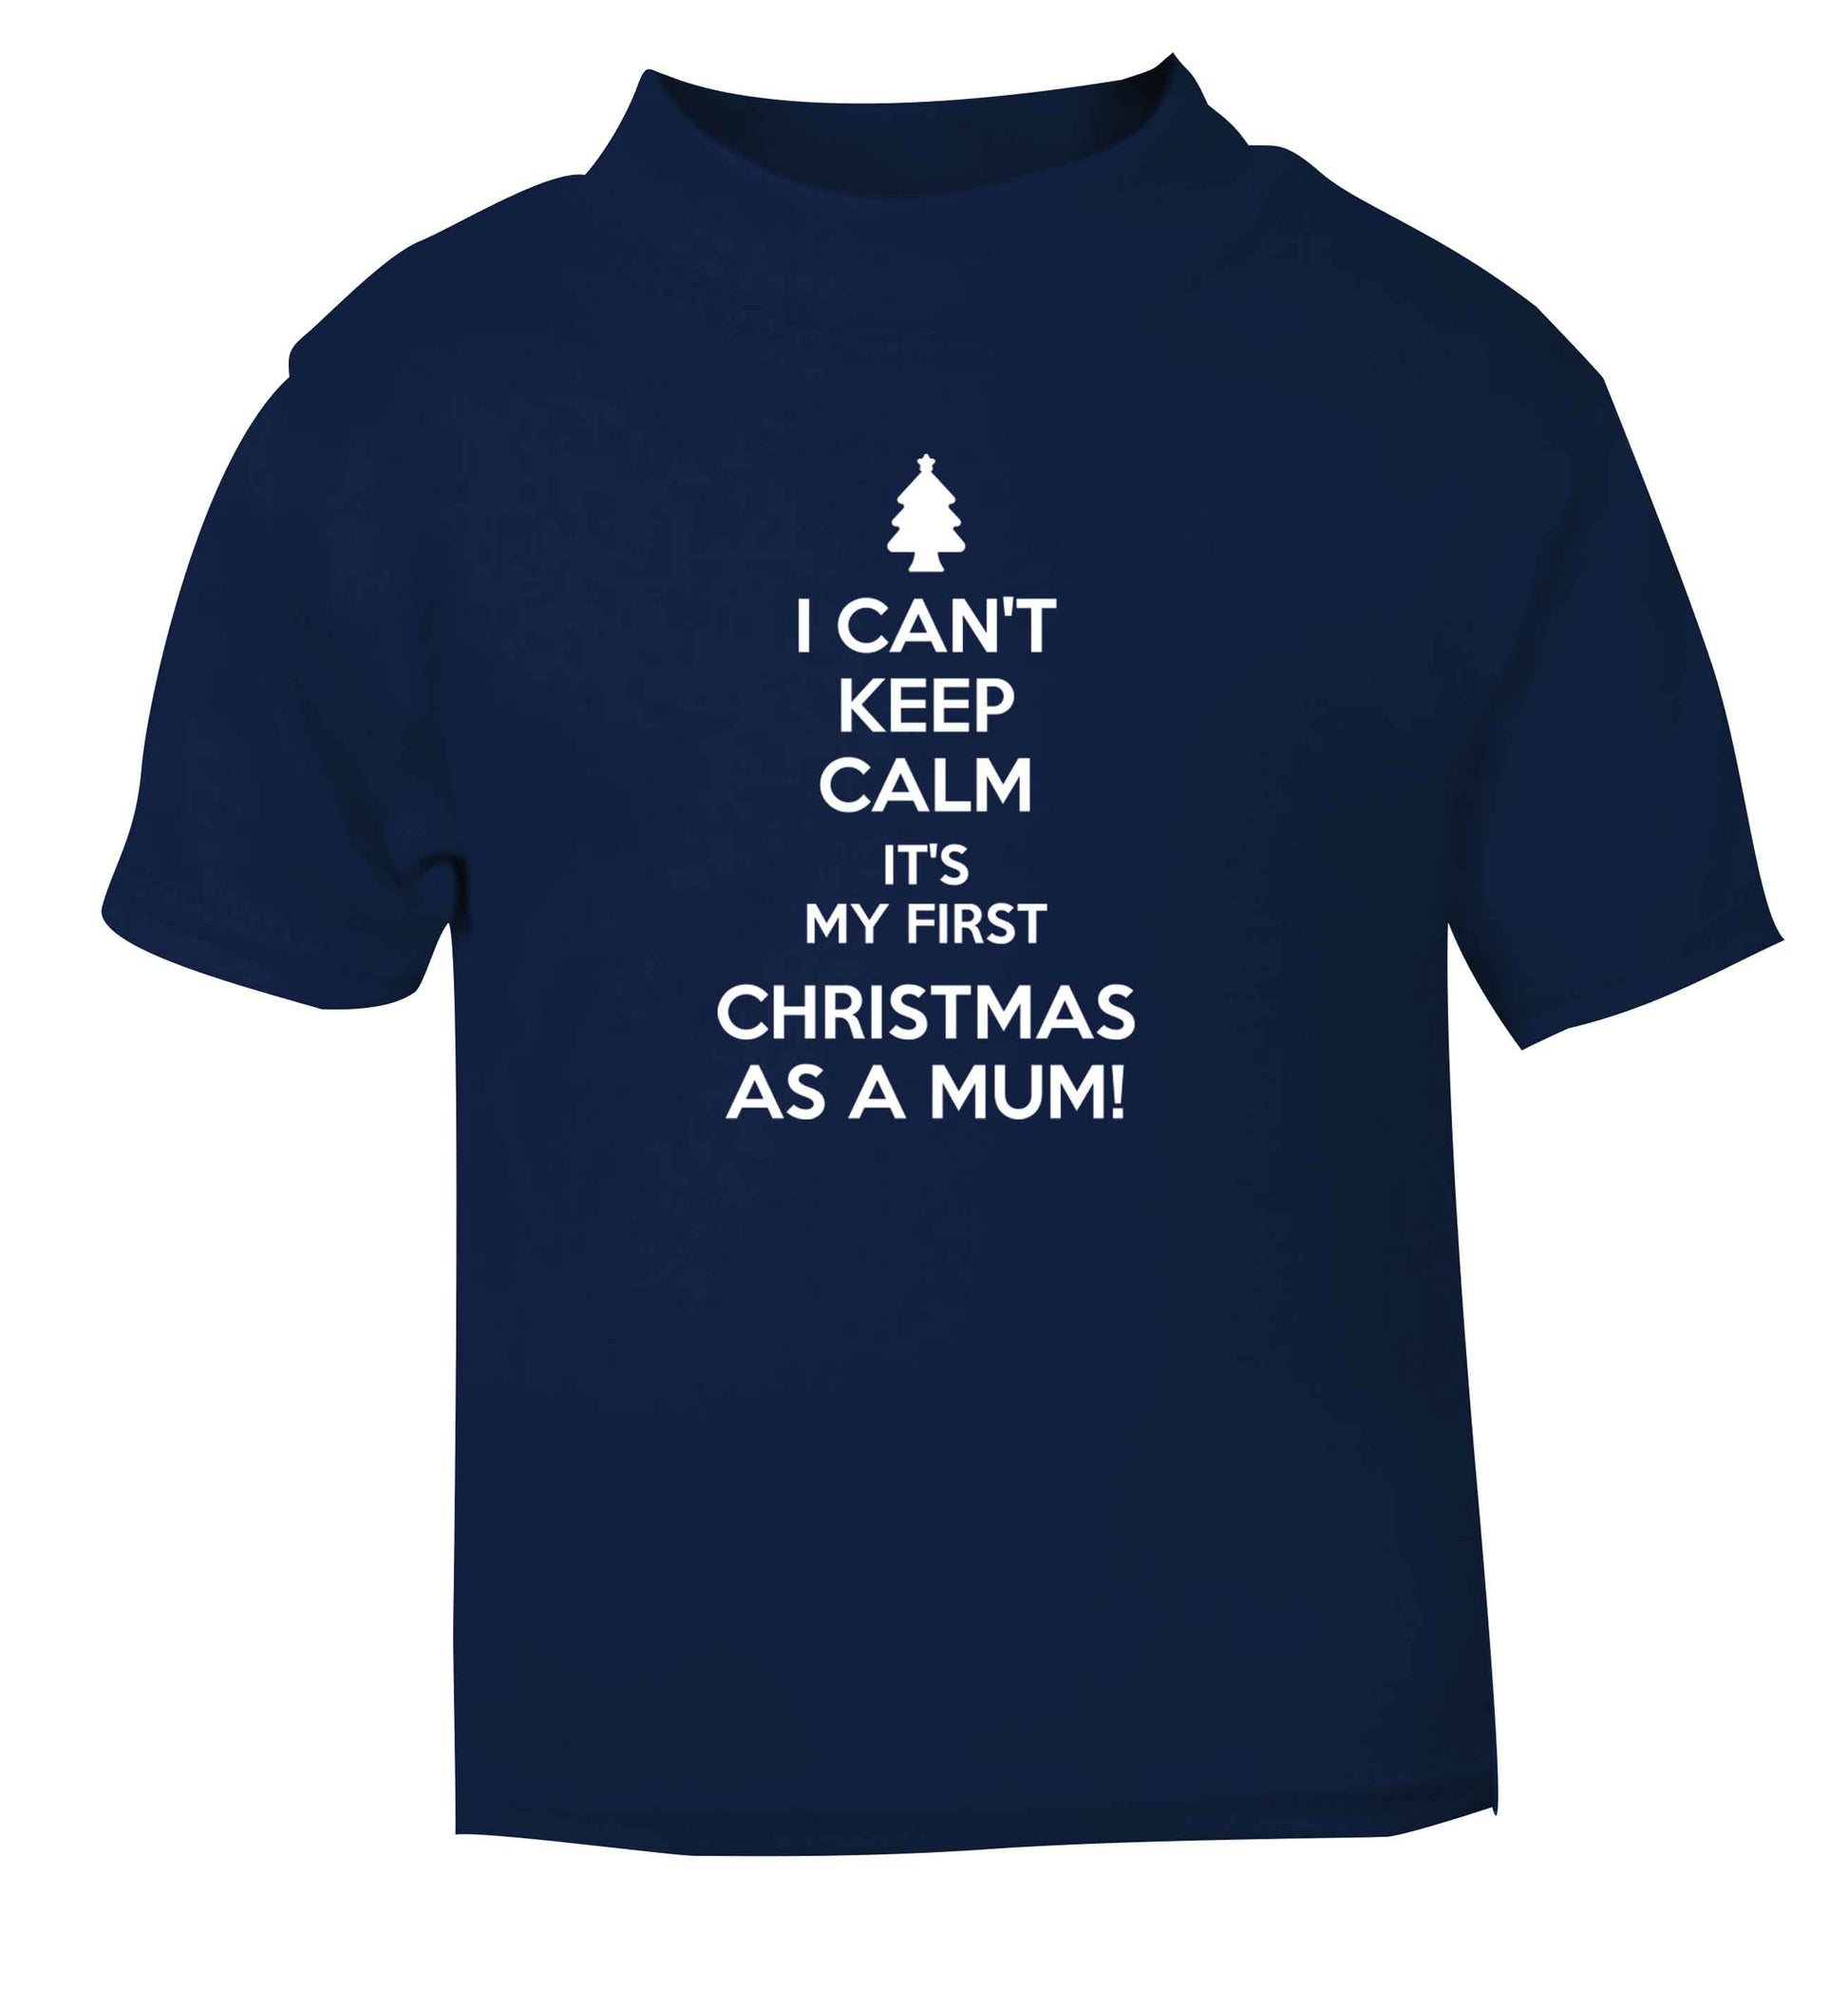 I can't keep calm it's my first Christmas as a mum navy Baby Toddler Tshirt 2 Years